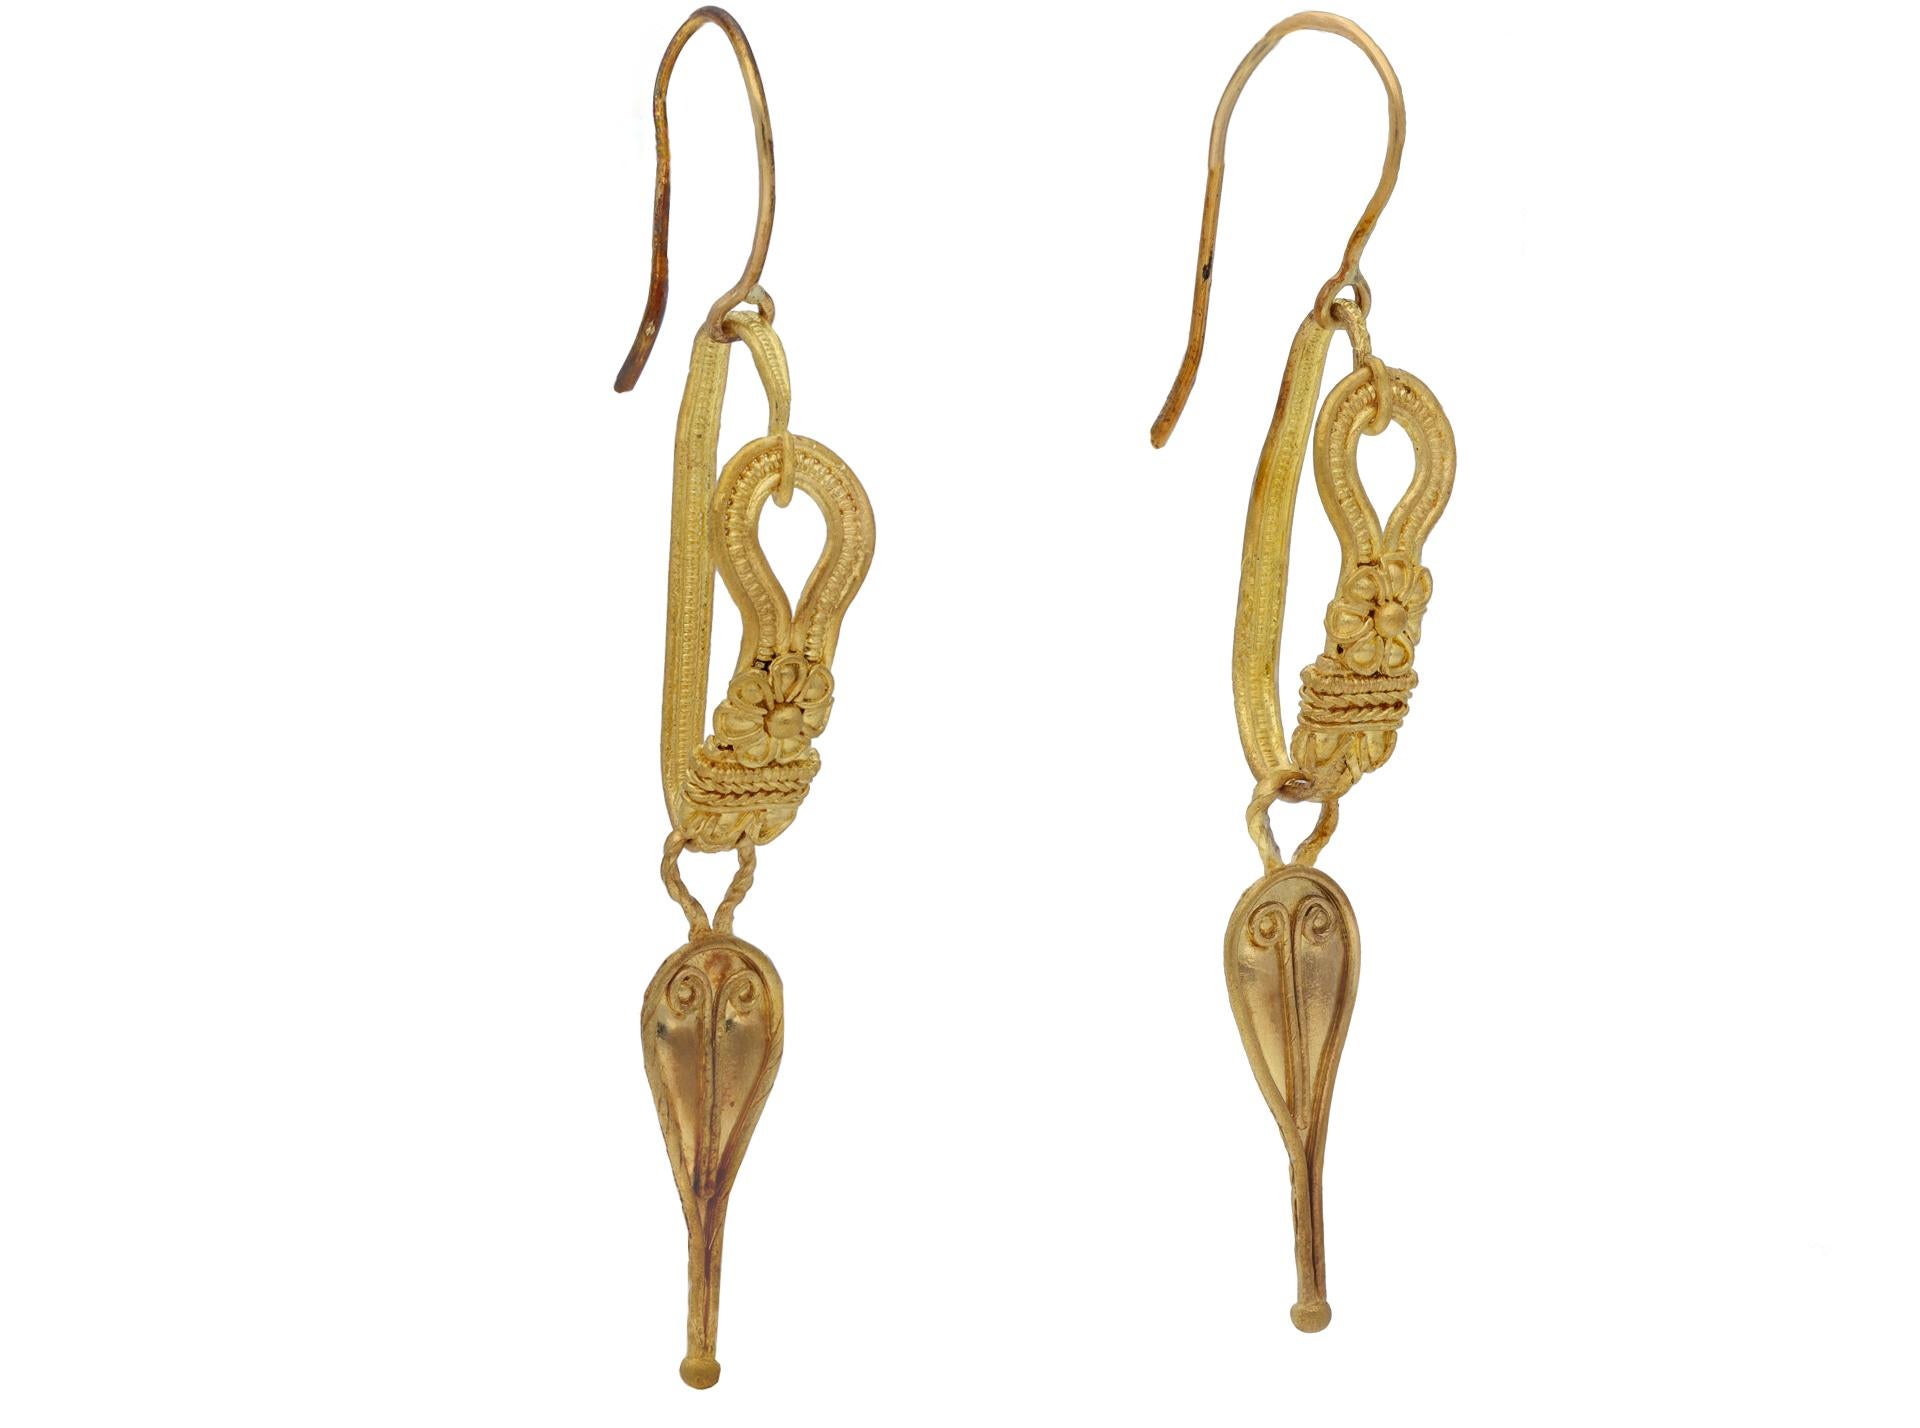 Ancient Roman earrings, 2nd century AD. A pair of yellow gold earrings, each with an inverted drop shaped ornament decorated a gold bead and scrolled wire ornaments and borders, each on a twisted wire loop, suspended from an ornate open looped hook